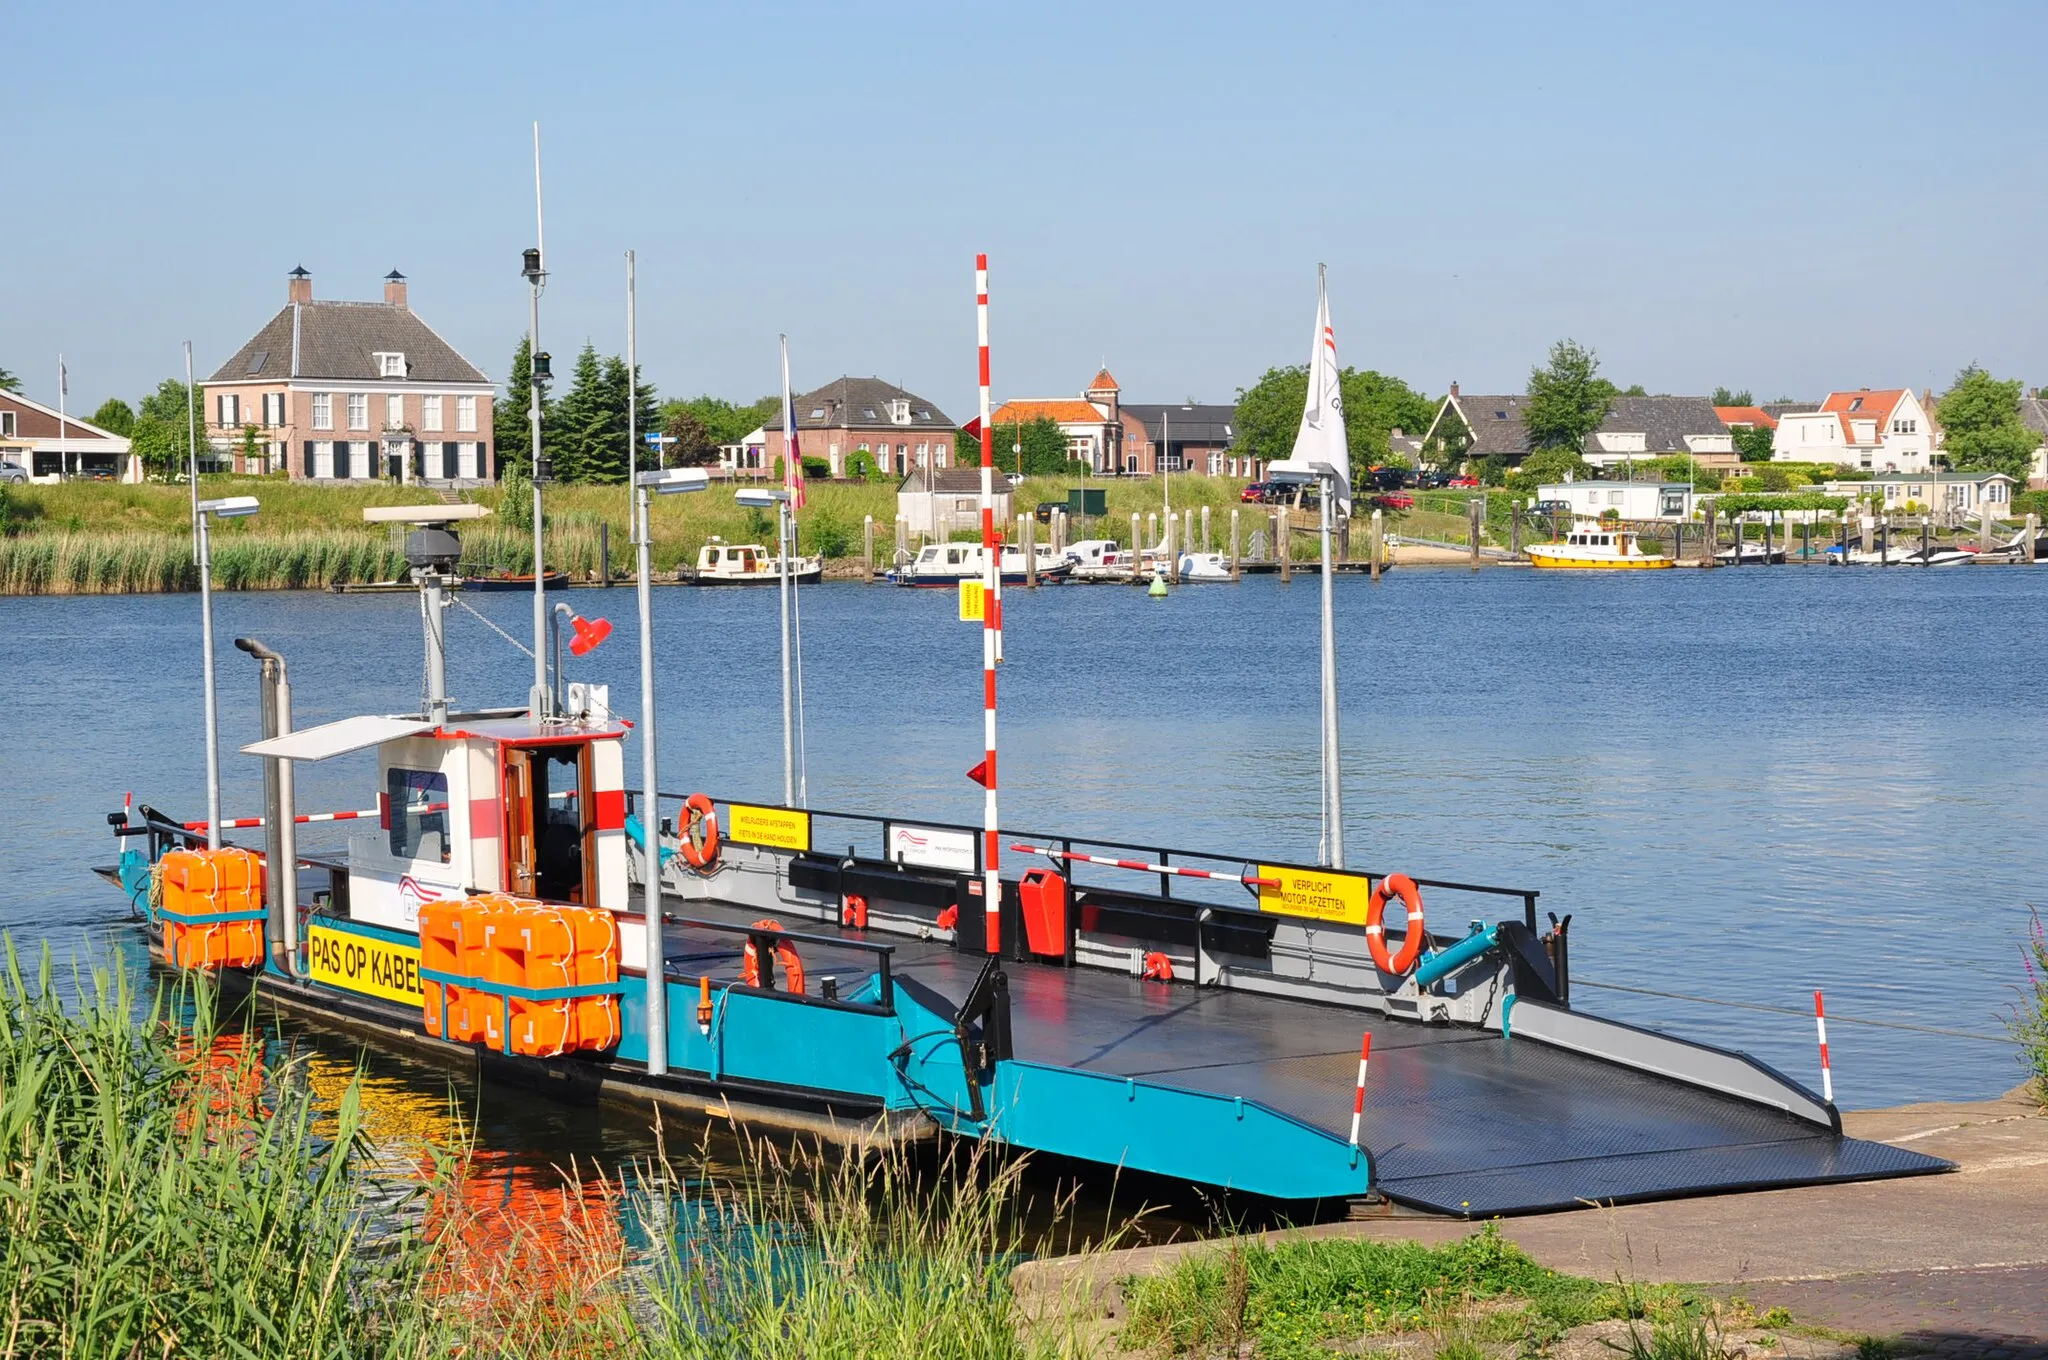 Photo showing: The village of Veen on the river Meuse (Province of North-Brabant, Netherlands).